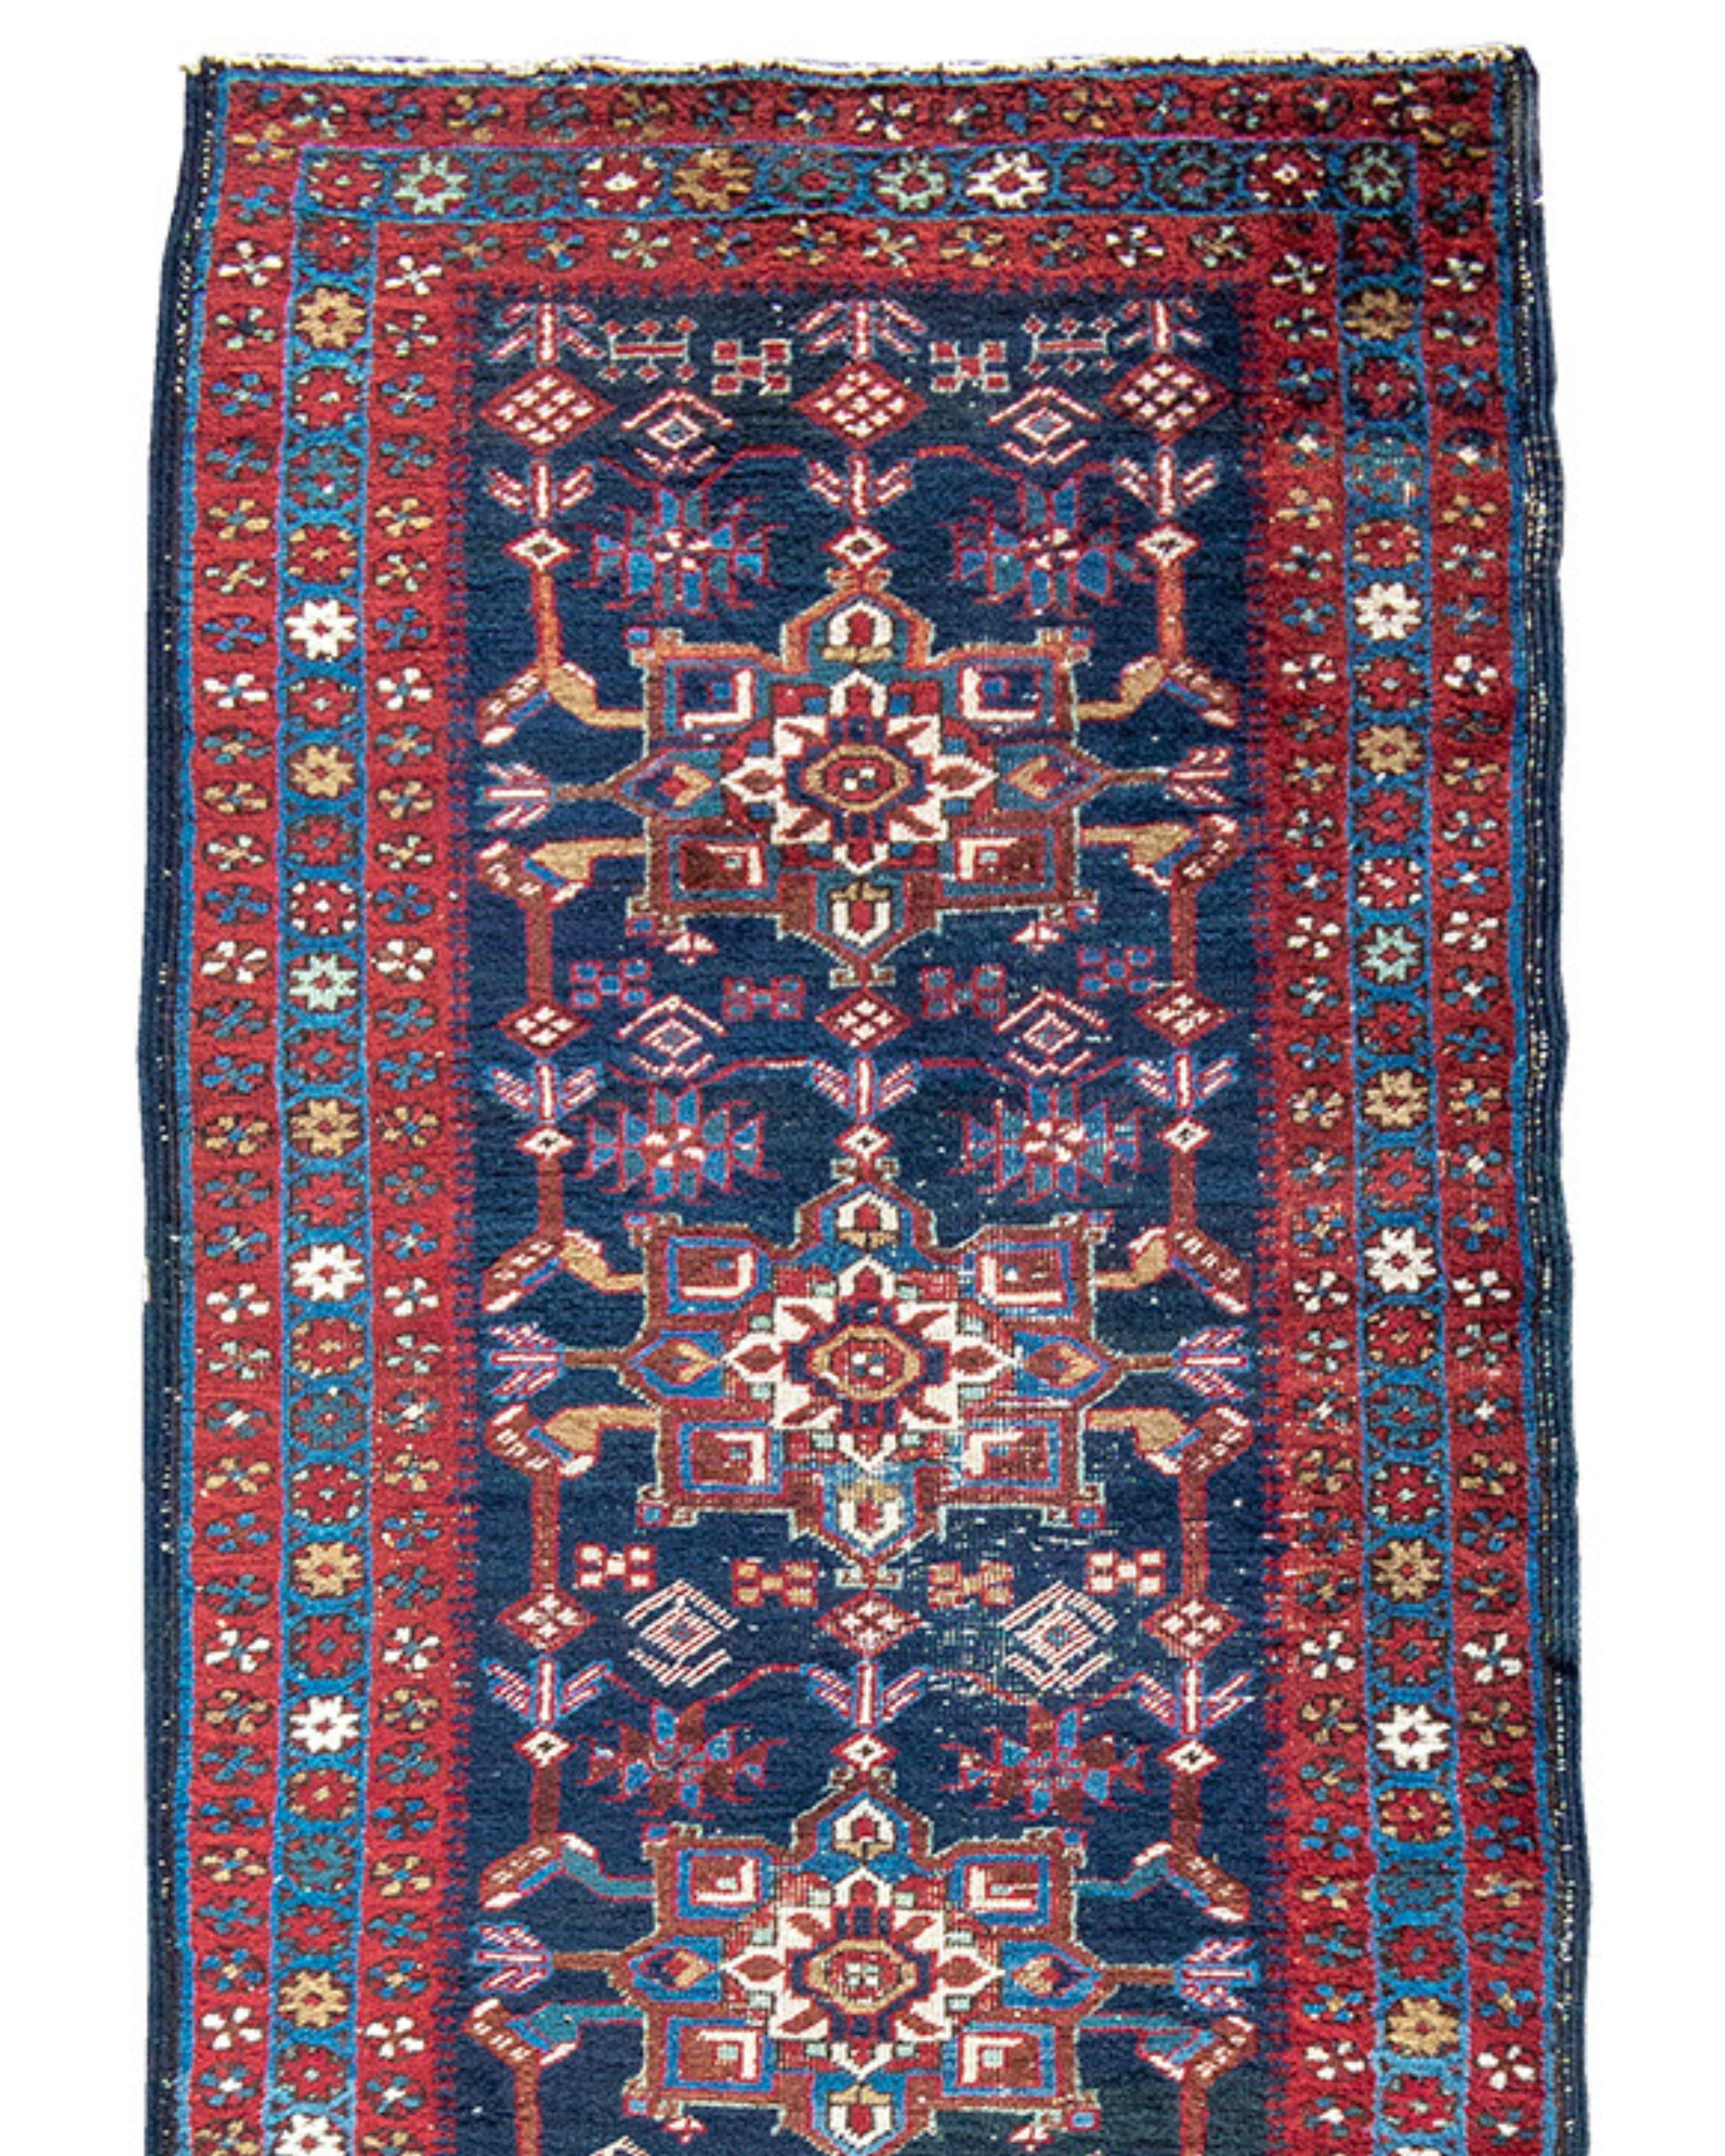 Antique Persian Heriz Runner Rug, Early 20th Century

Additional Information:
Dimensions: 2'8